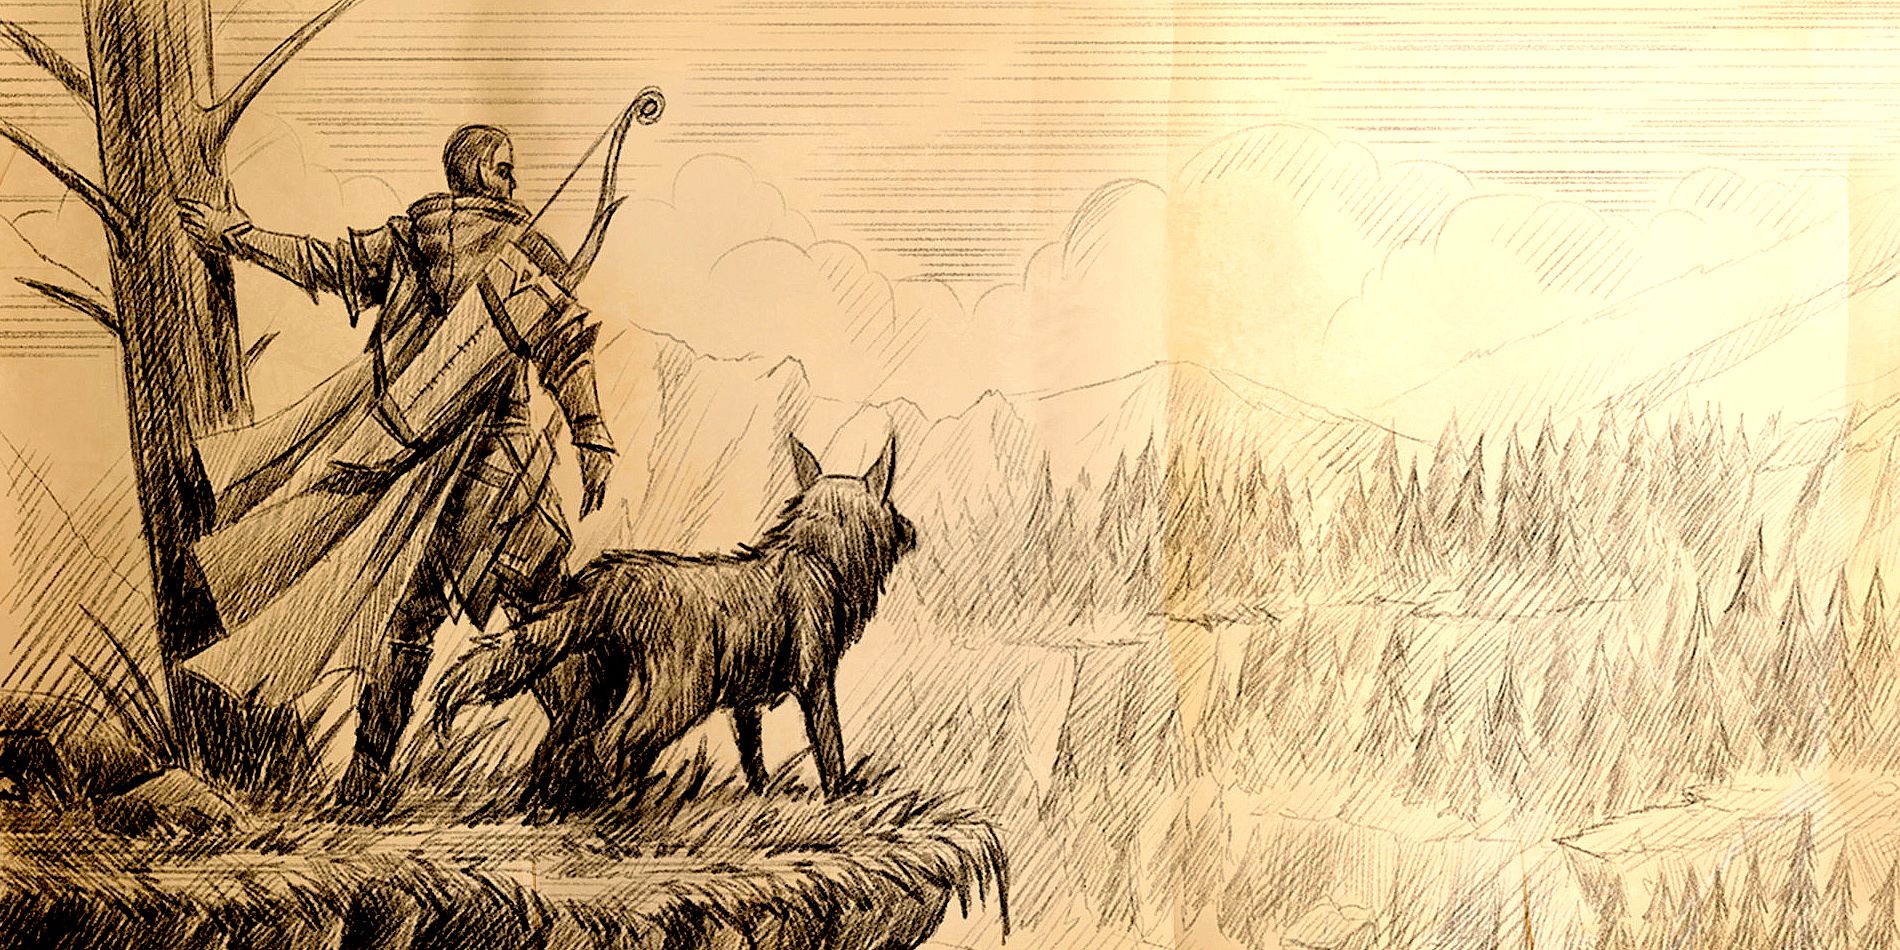 A sketch from Pathfinder: Kingmaker showing a character and a dog on the edge of a cliff, overlooking a forest below.